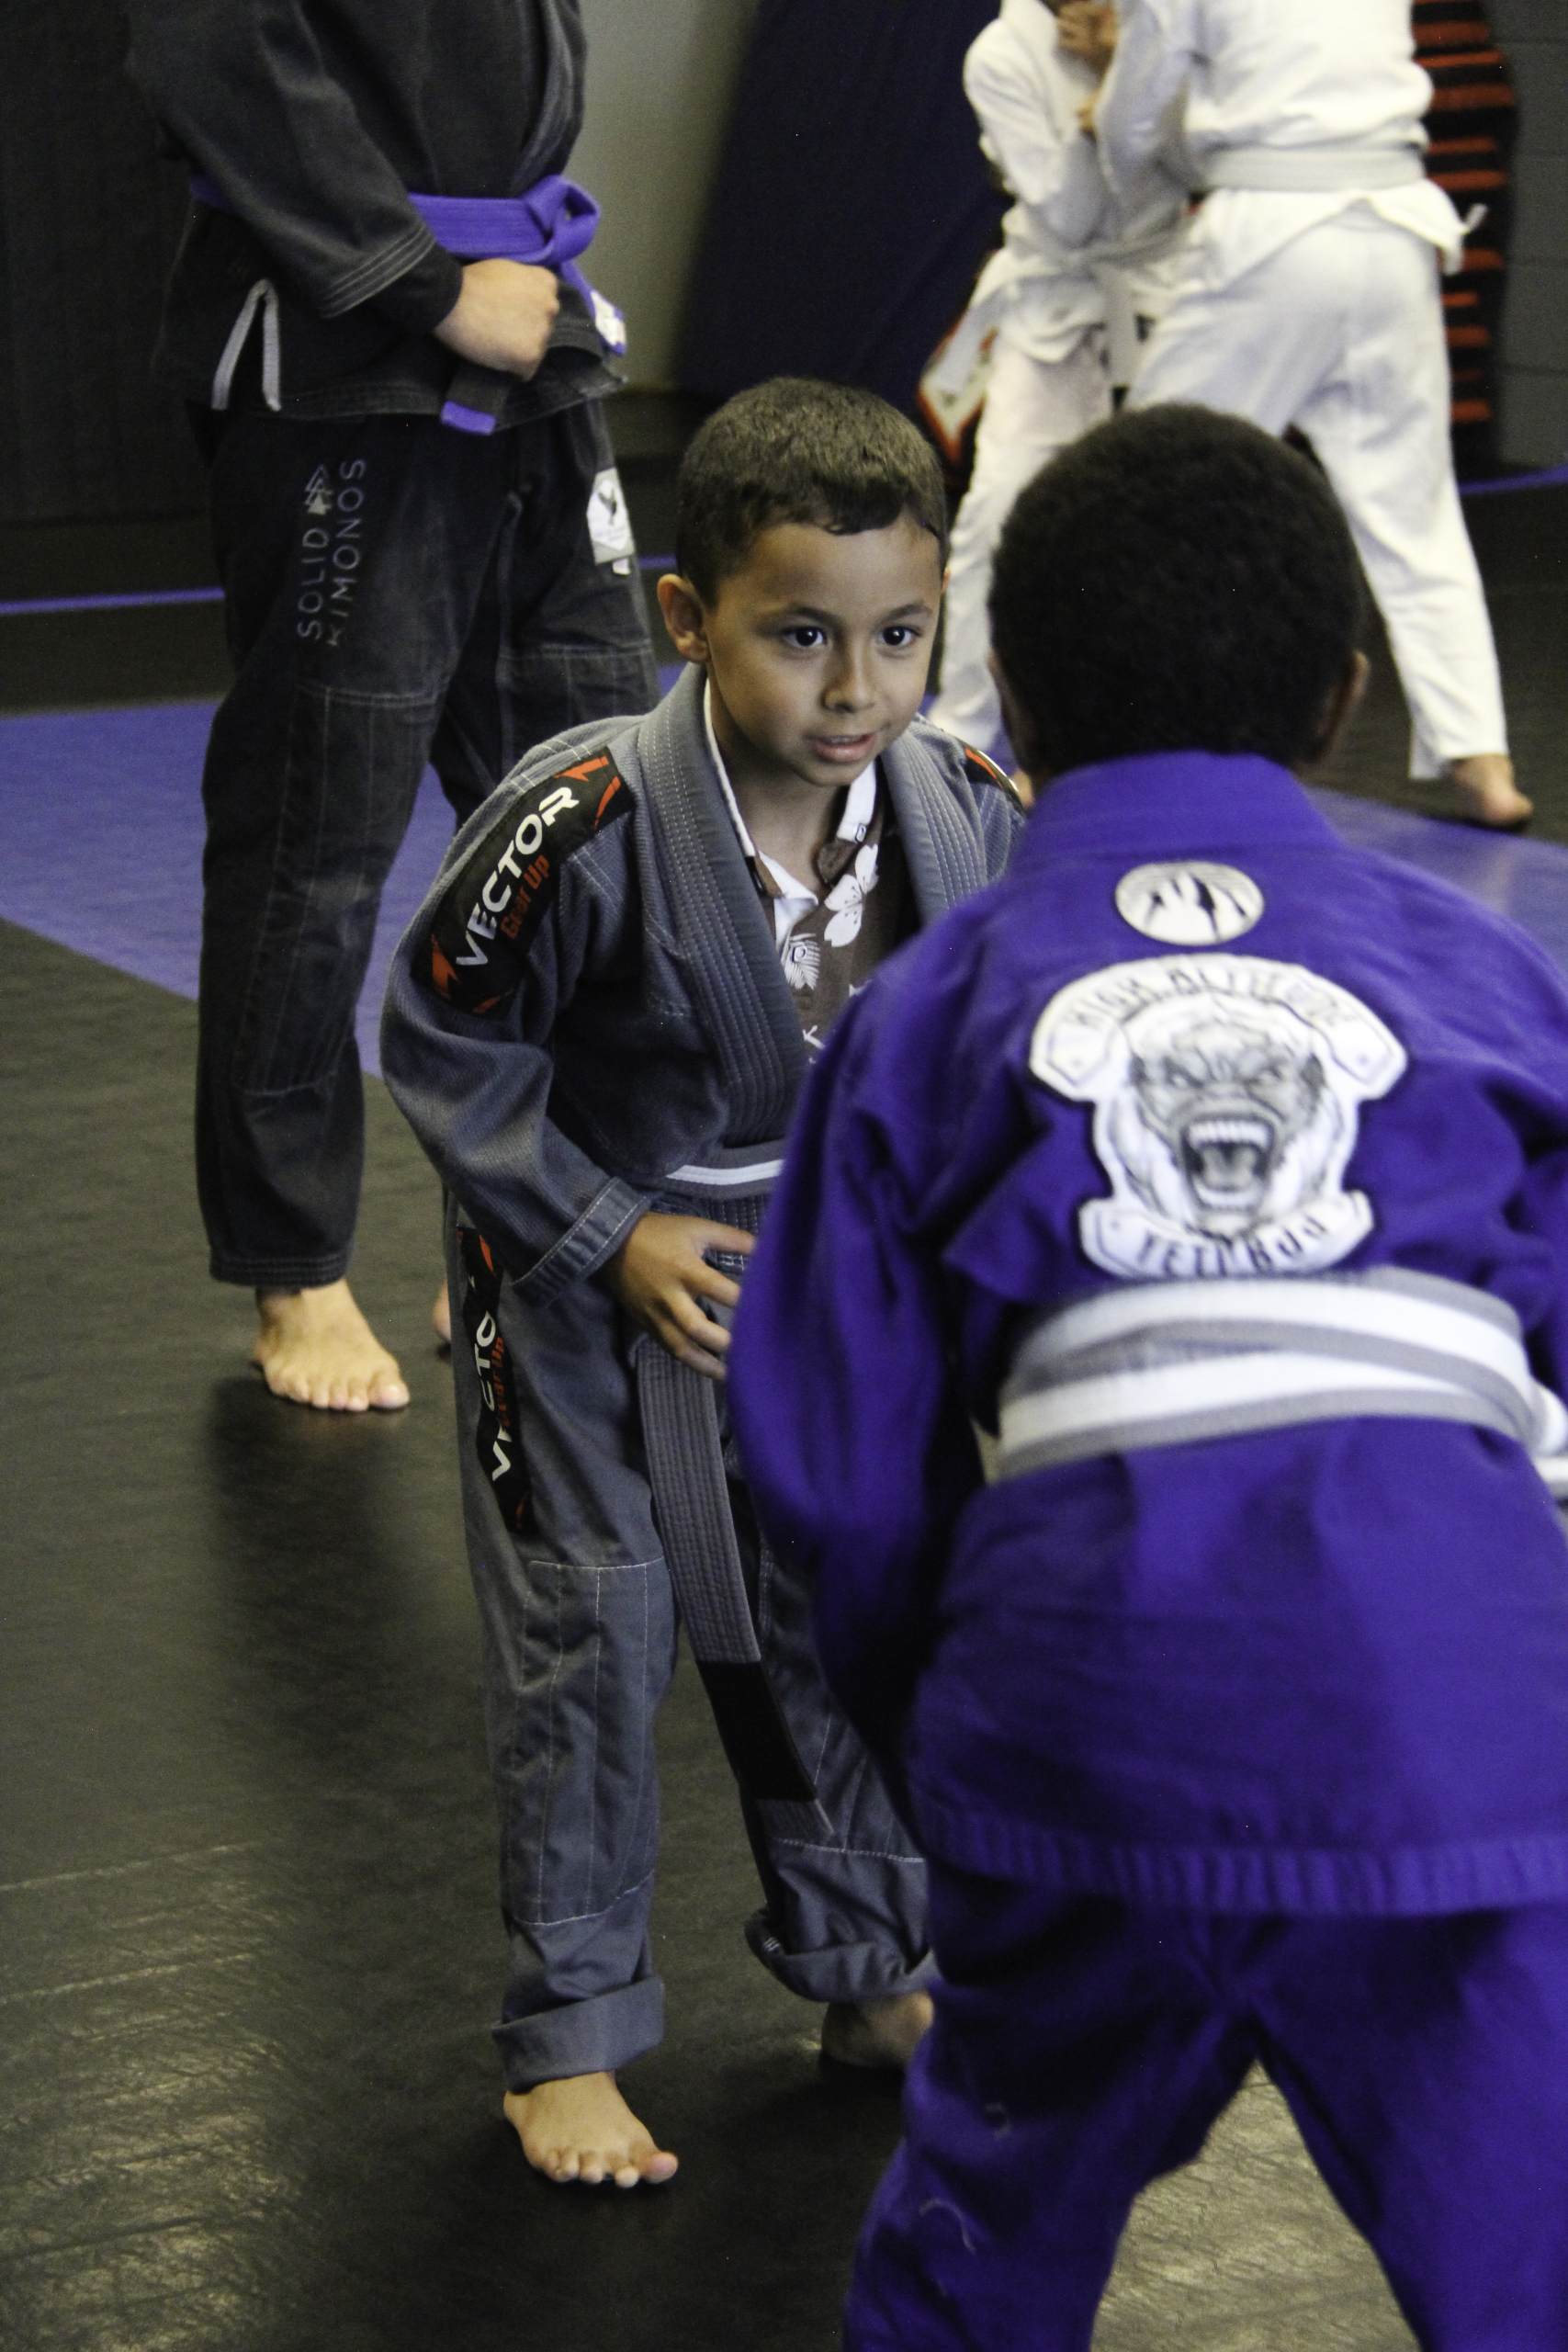 Local gym takes stance on bullying, benefits of martial arts